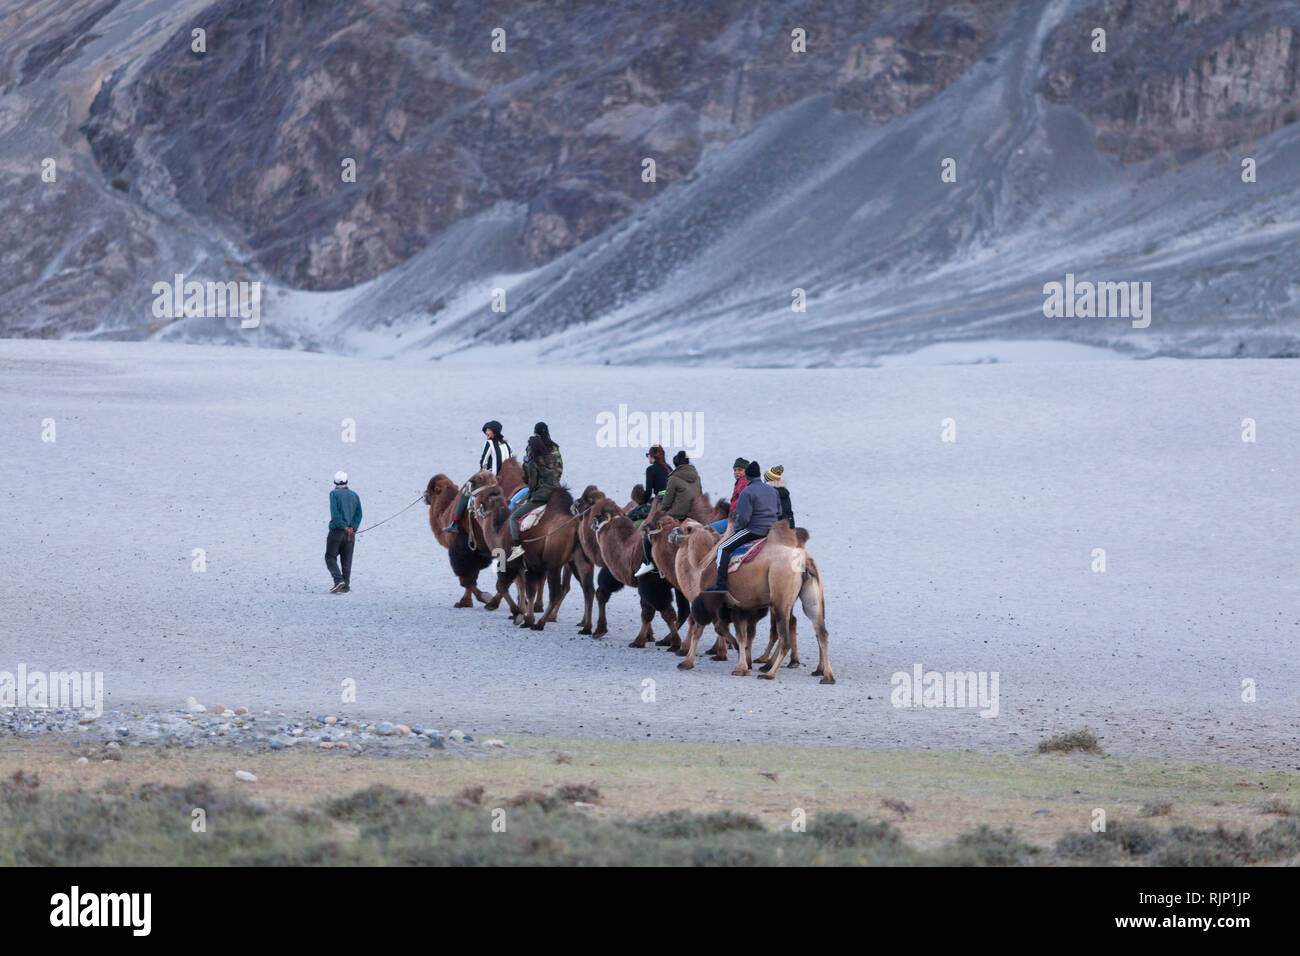 Group of tourists riding bactrian camels in the area of sand dunes near Hunder, Nubra Valley, Ladakh, Jammu and Kashmir, India Stock Photo